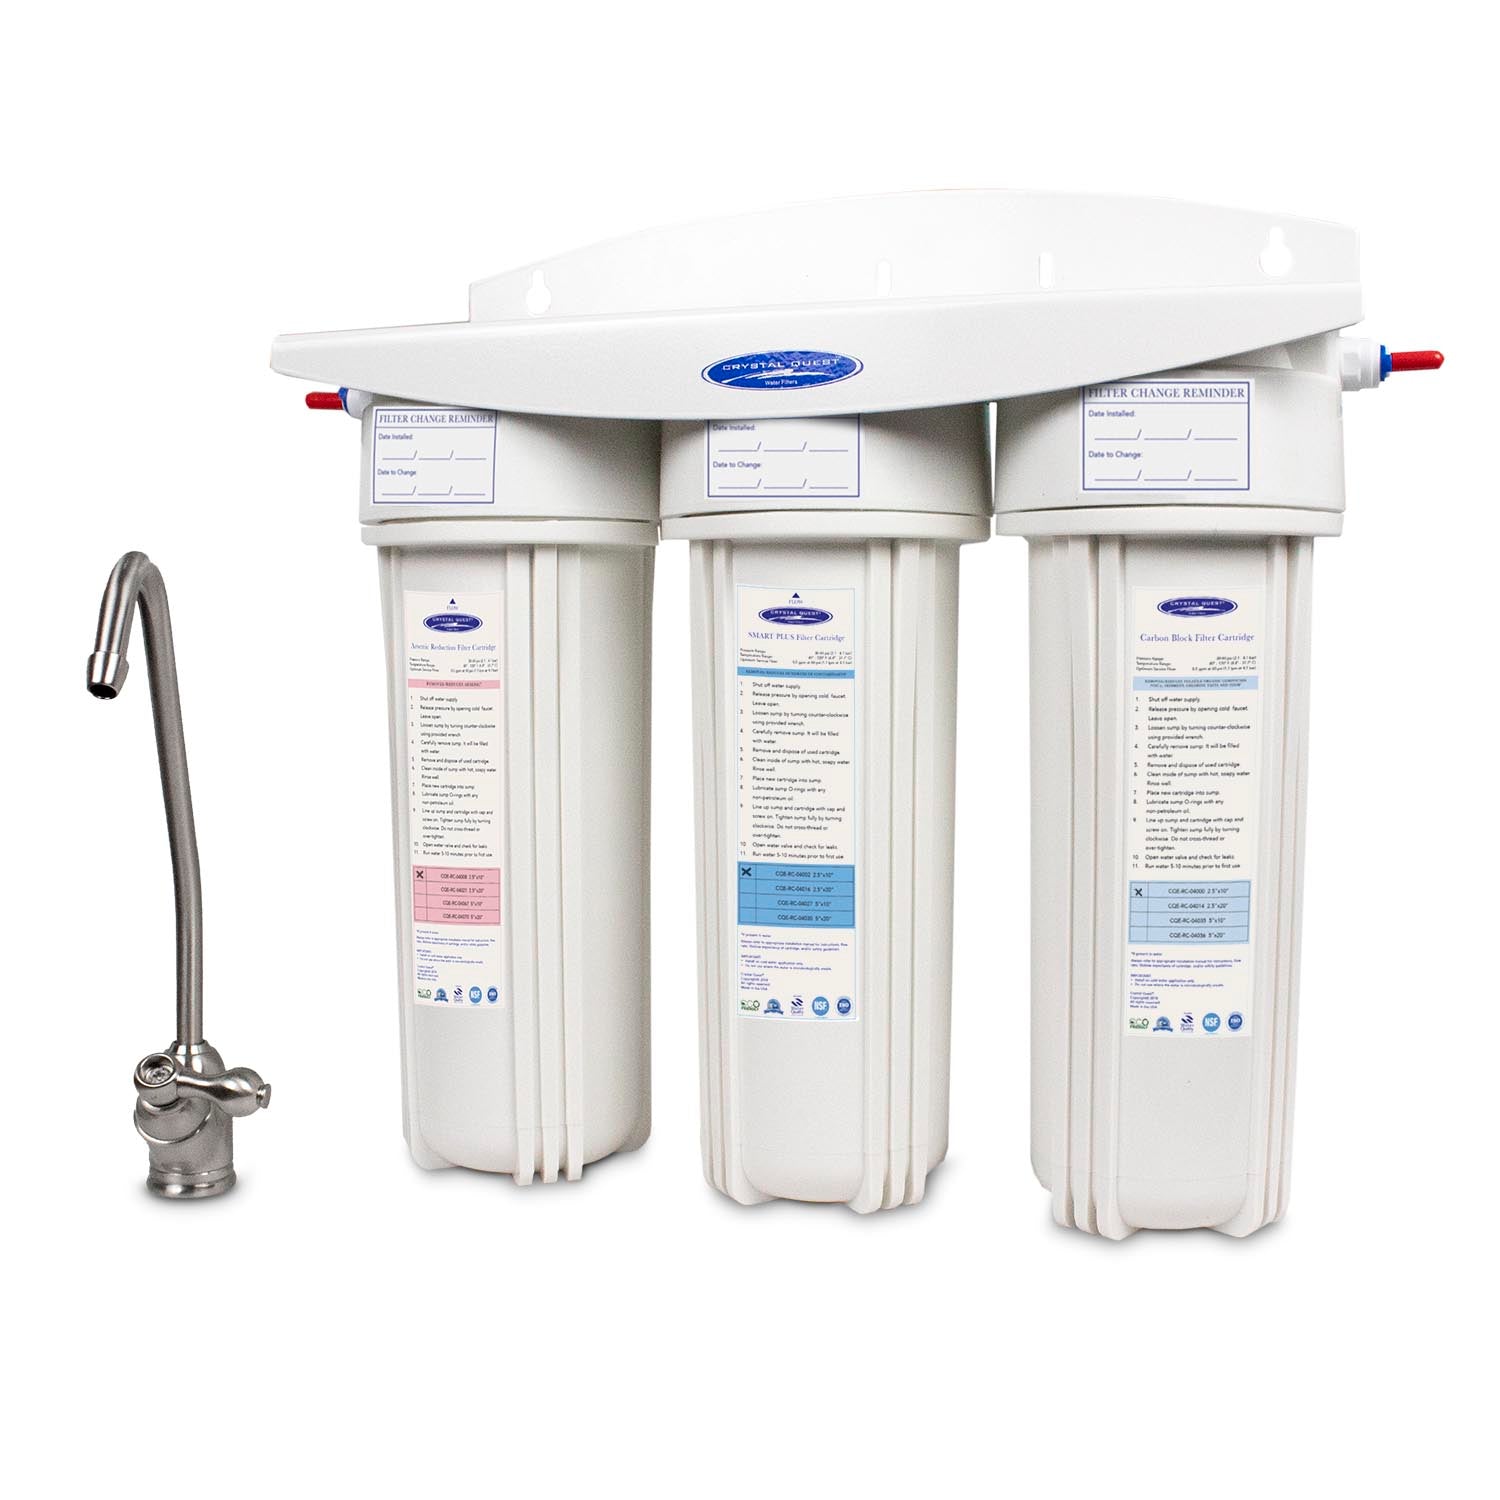 Crystal Quest Arsenic Under Sink Water Filter System